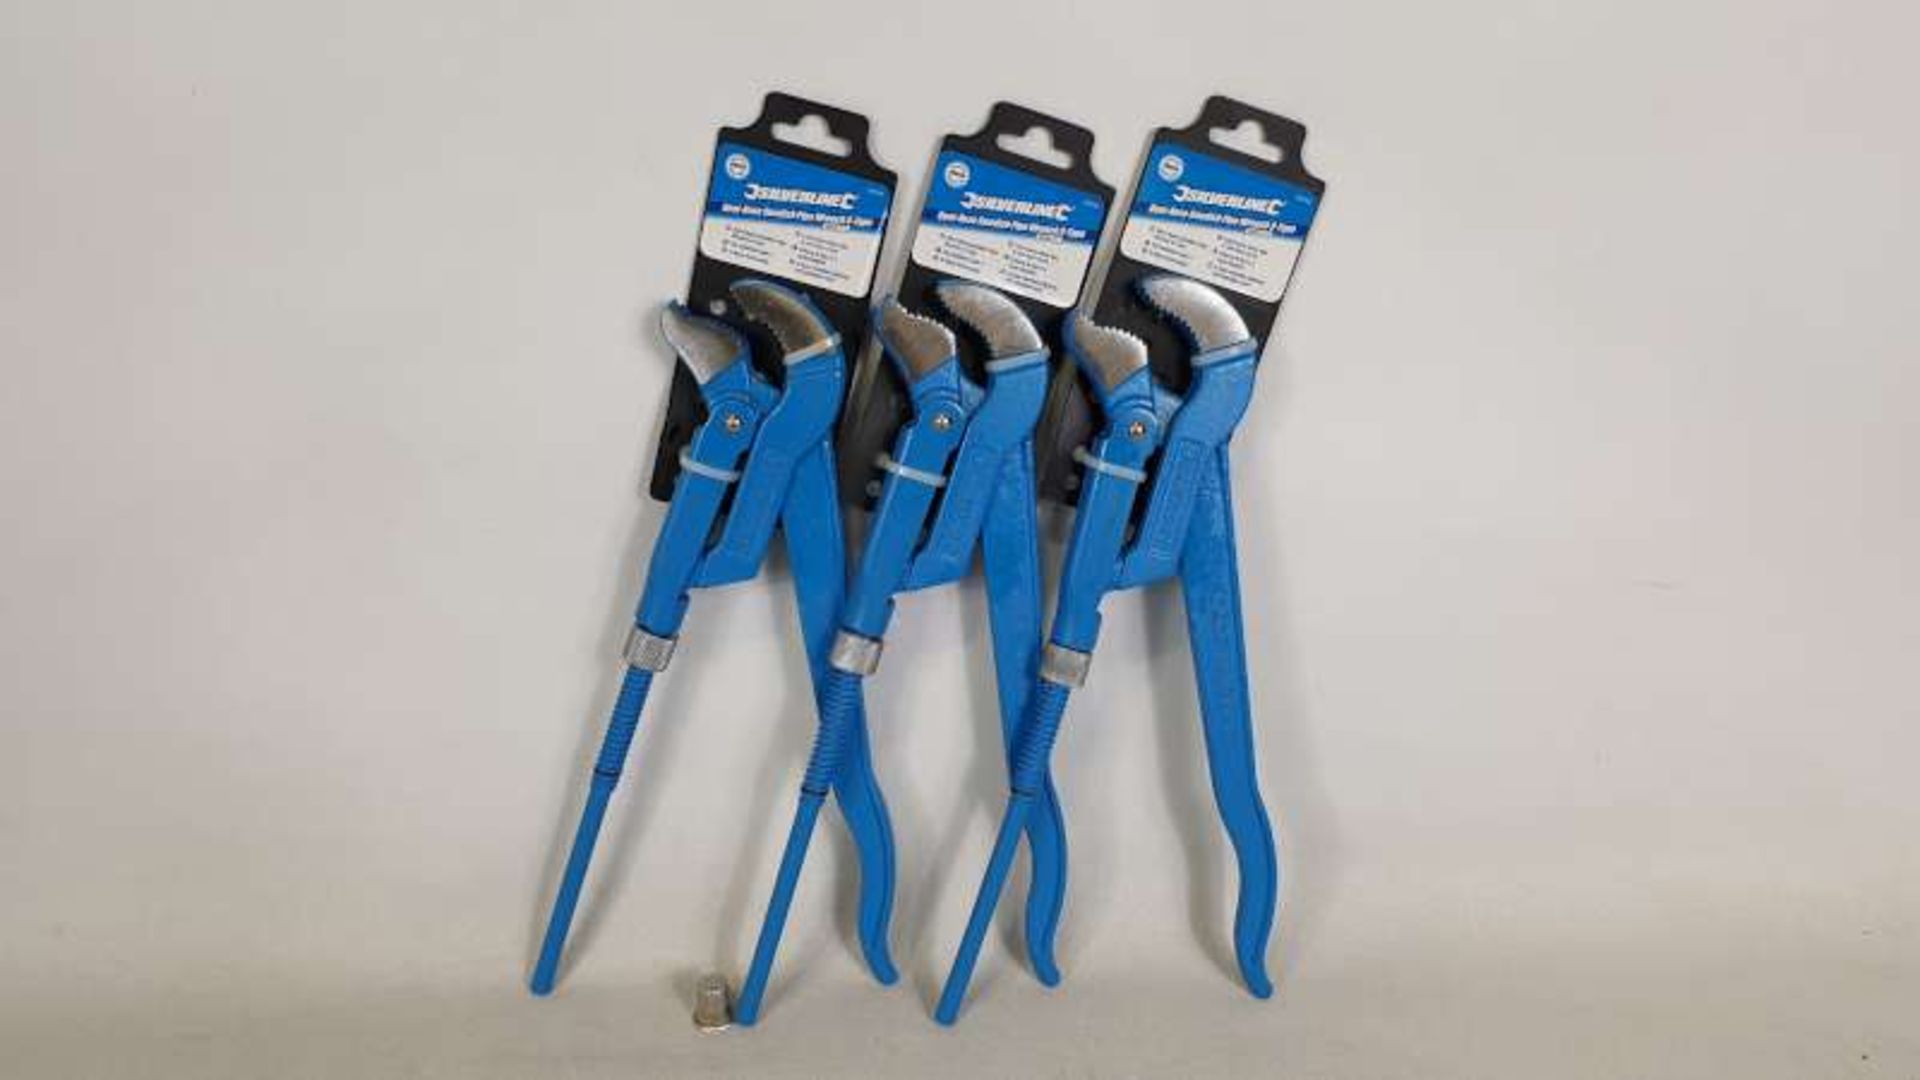 24 X BRAND NEW SILVERLINE BENT NOSE SWEDISH PIPE WRENCH S-TYPE 25MM IN 1 BOX